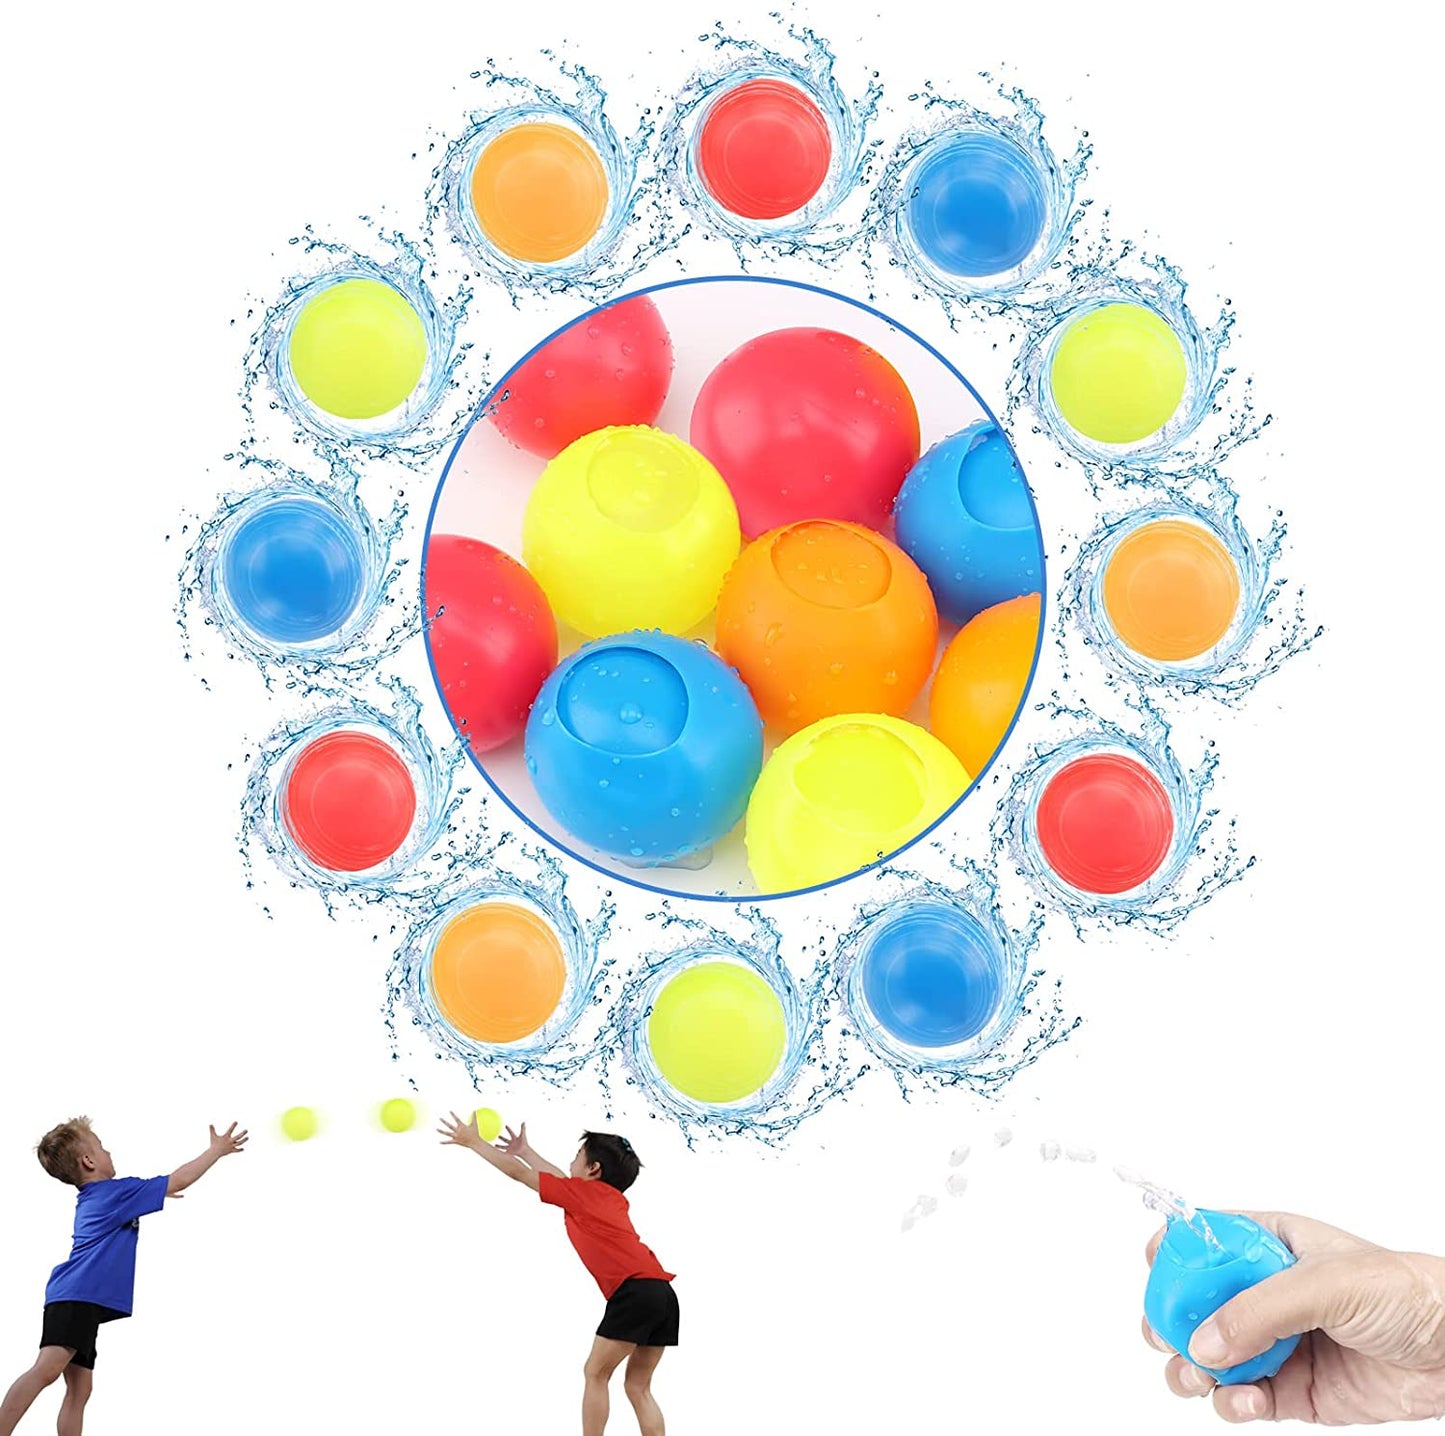 16pcs Reusable Water Balloons, Water Bomb Splash Balls For Swimming Pools, Refillable Quick-Fill Self-Sealing Balls, Summer Water Parks For Backyard Fun, Summer Parties For Water Fighting Games